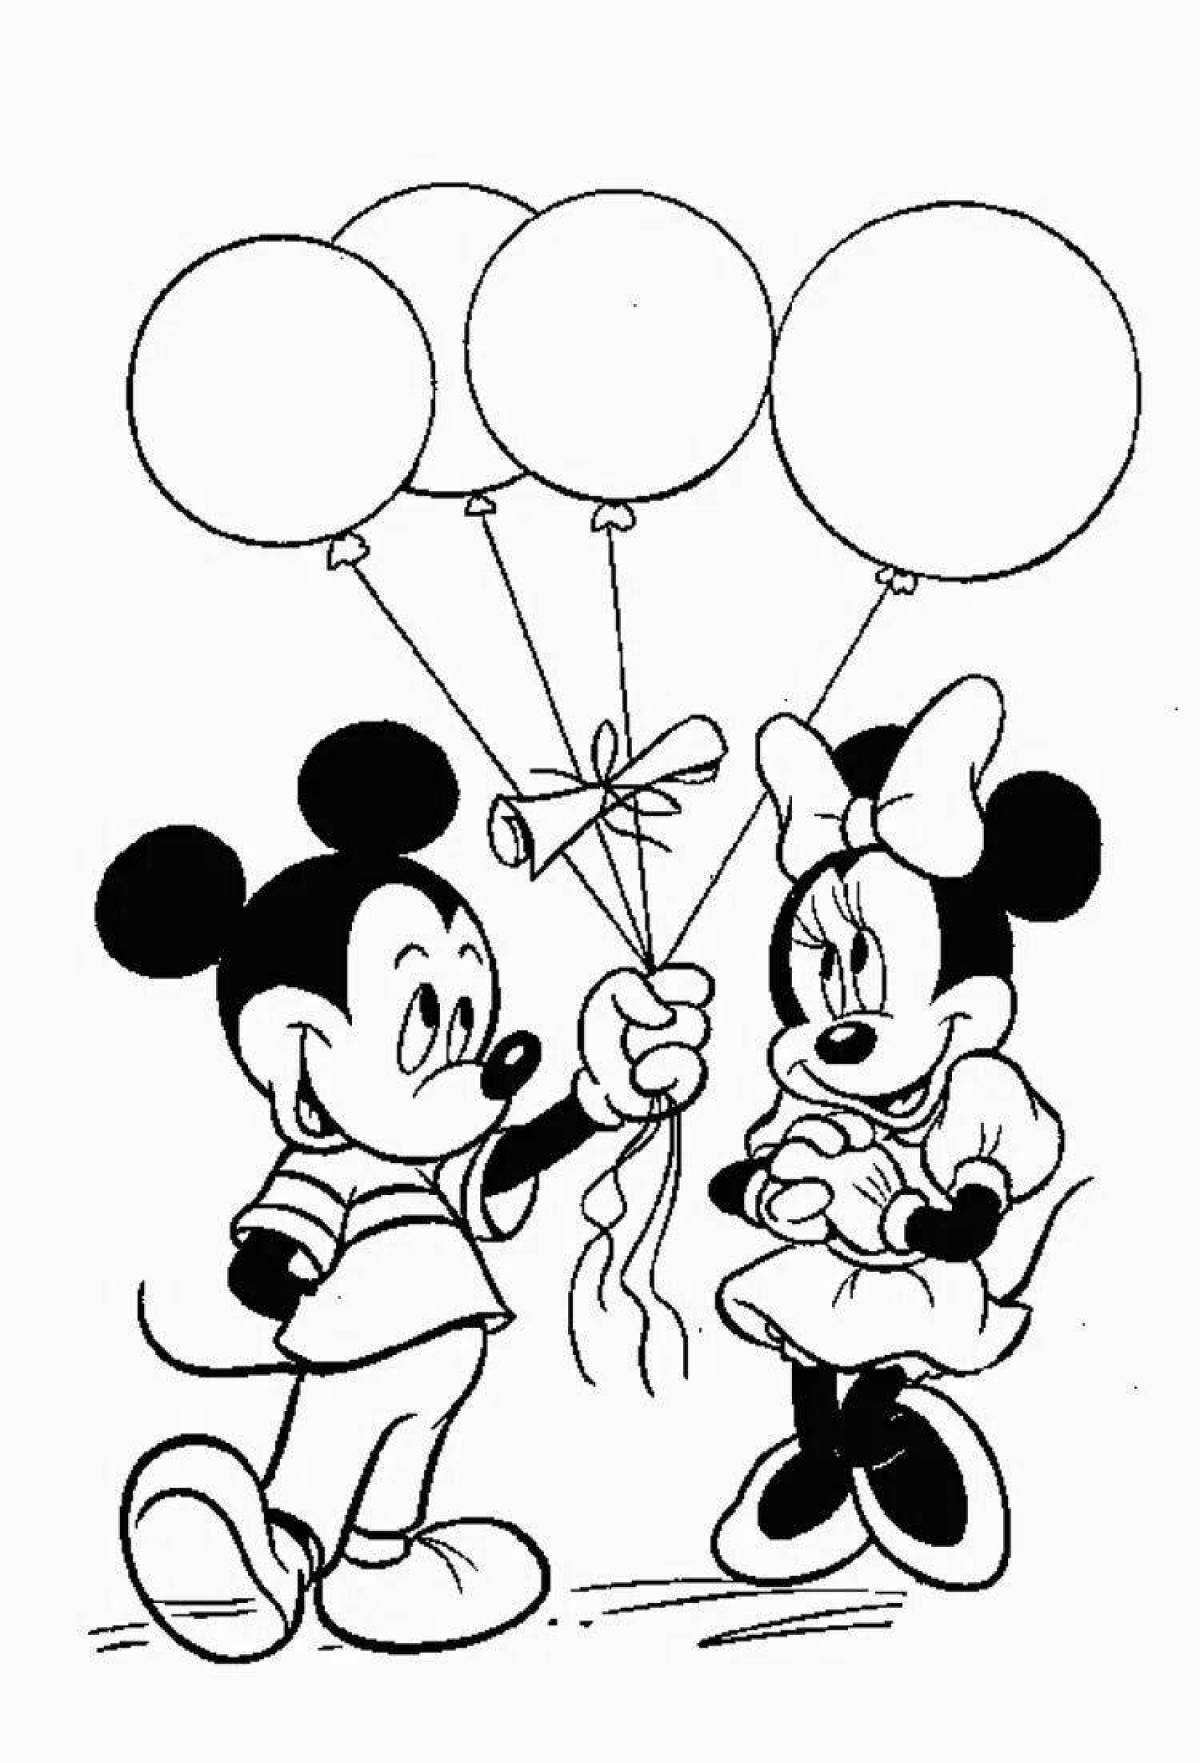 Cute minnie mouse coloring book for kids